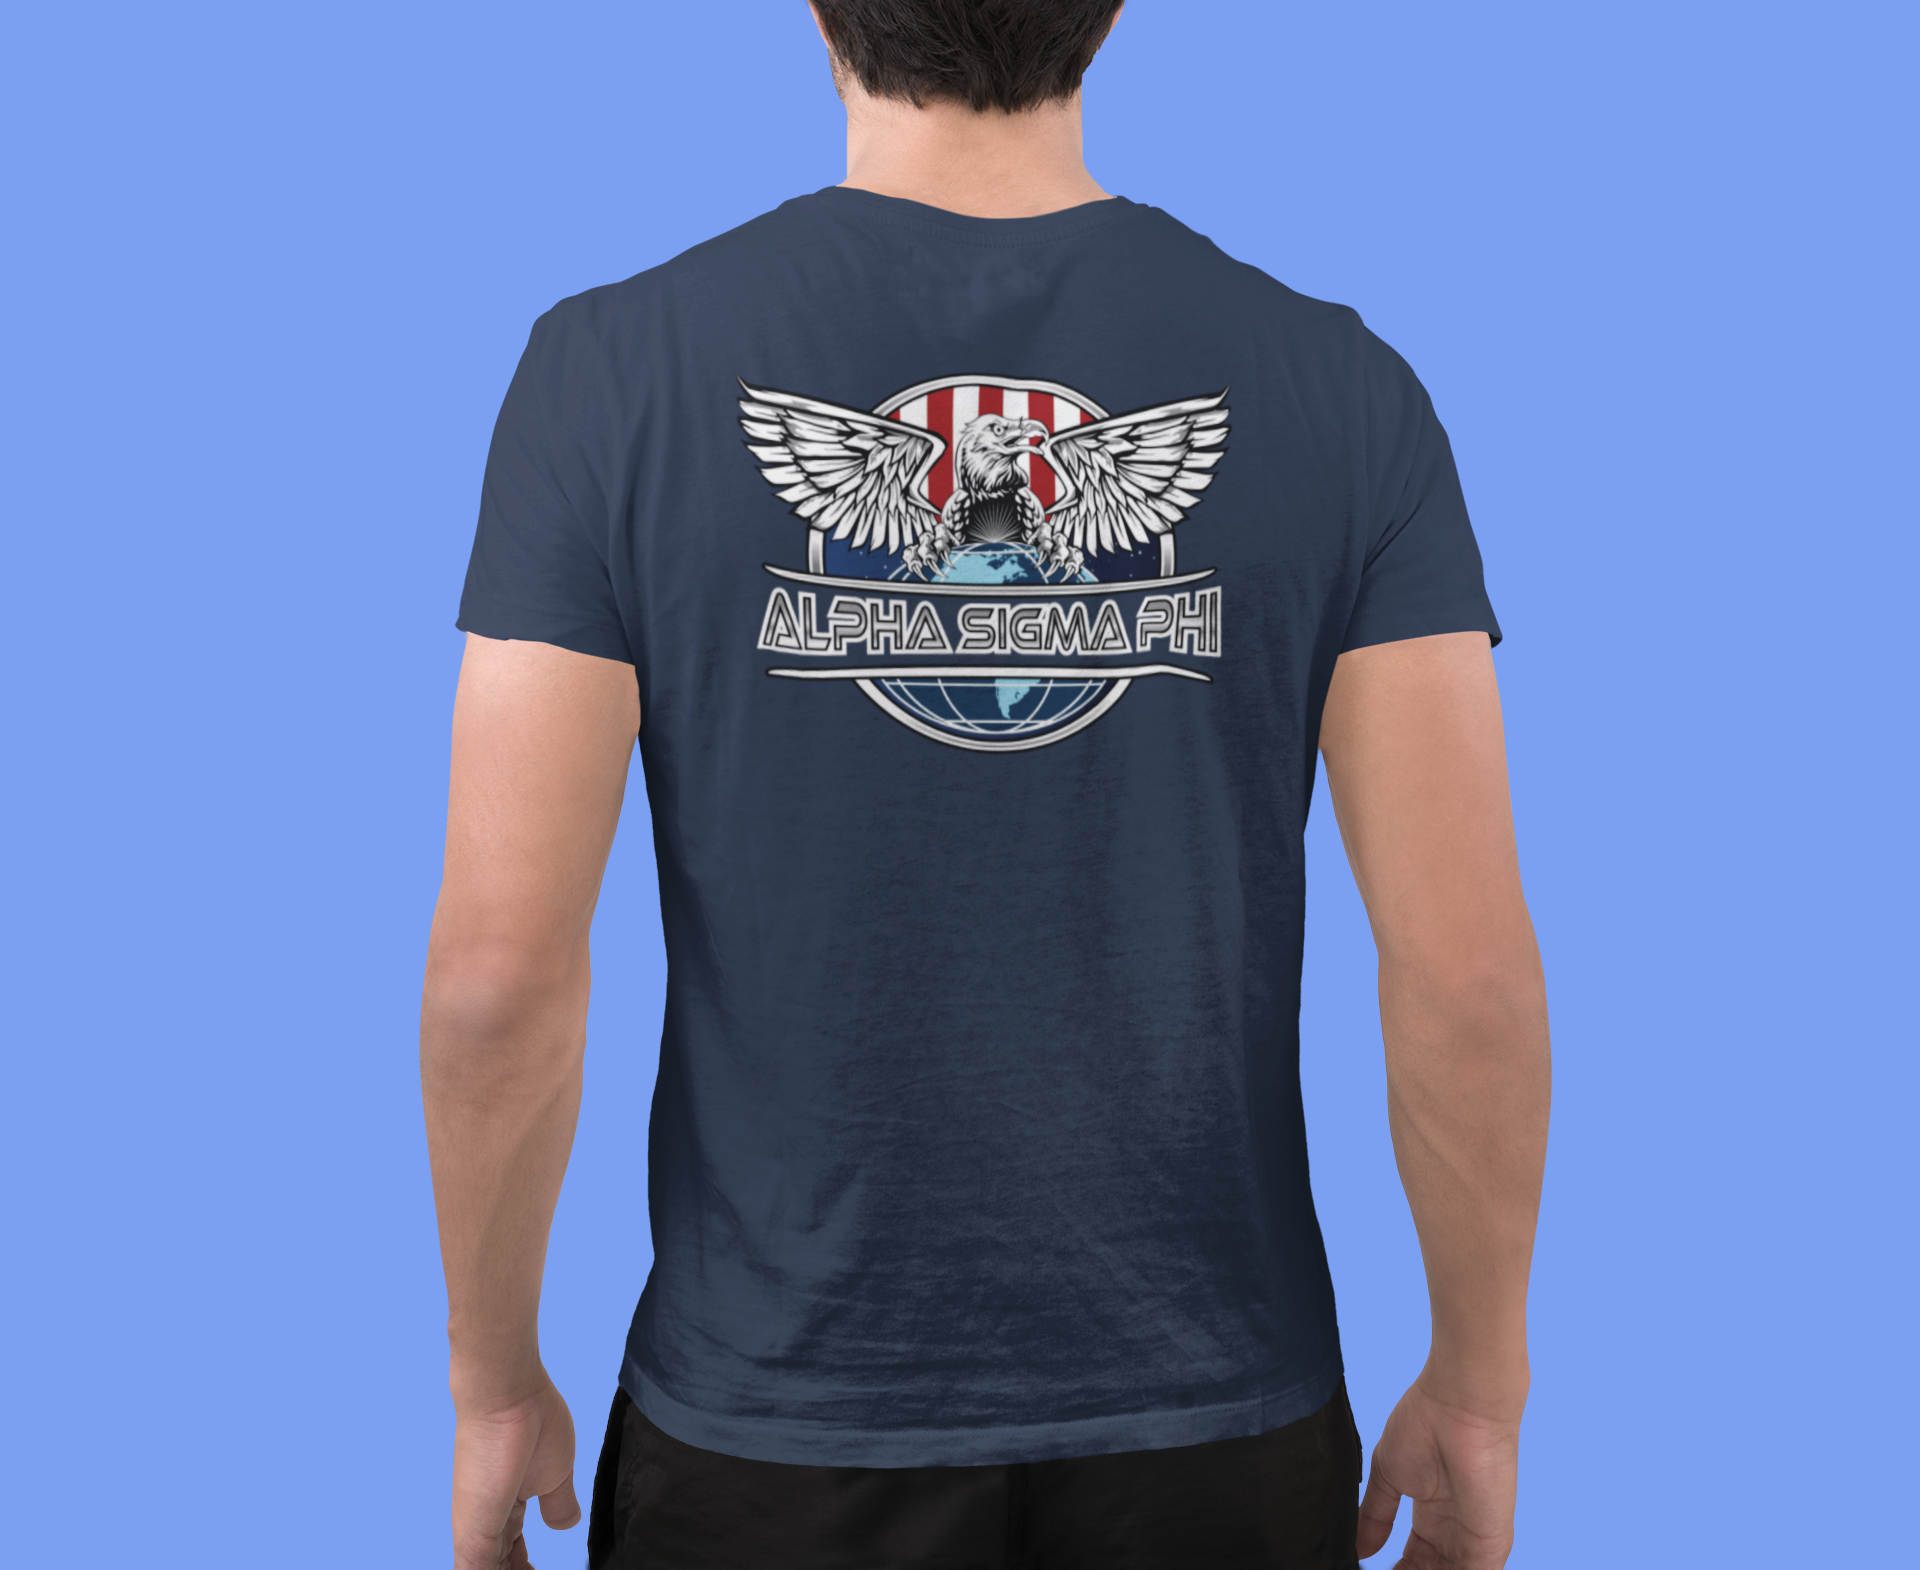 Navy Alpha Sigma Phi Graphic T-Shirt | The Fraternal Order | Alpha Sigma Phi Fraternity Clothes back model 